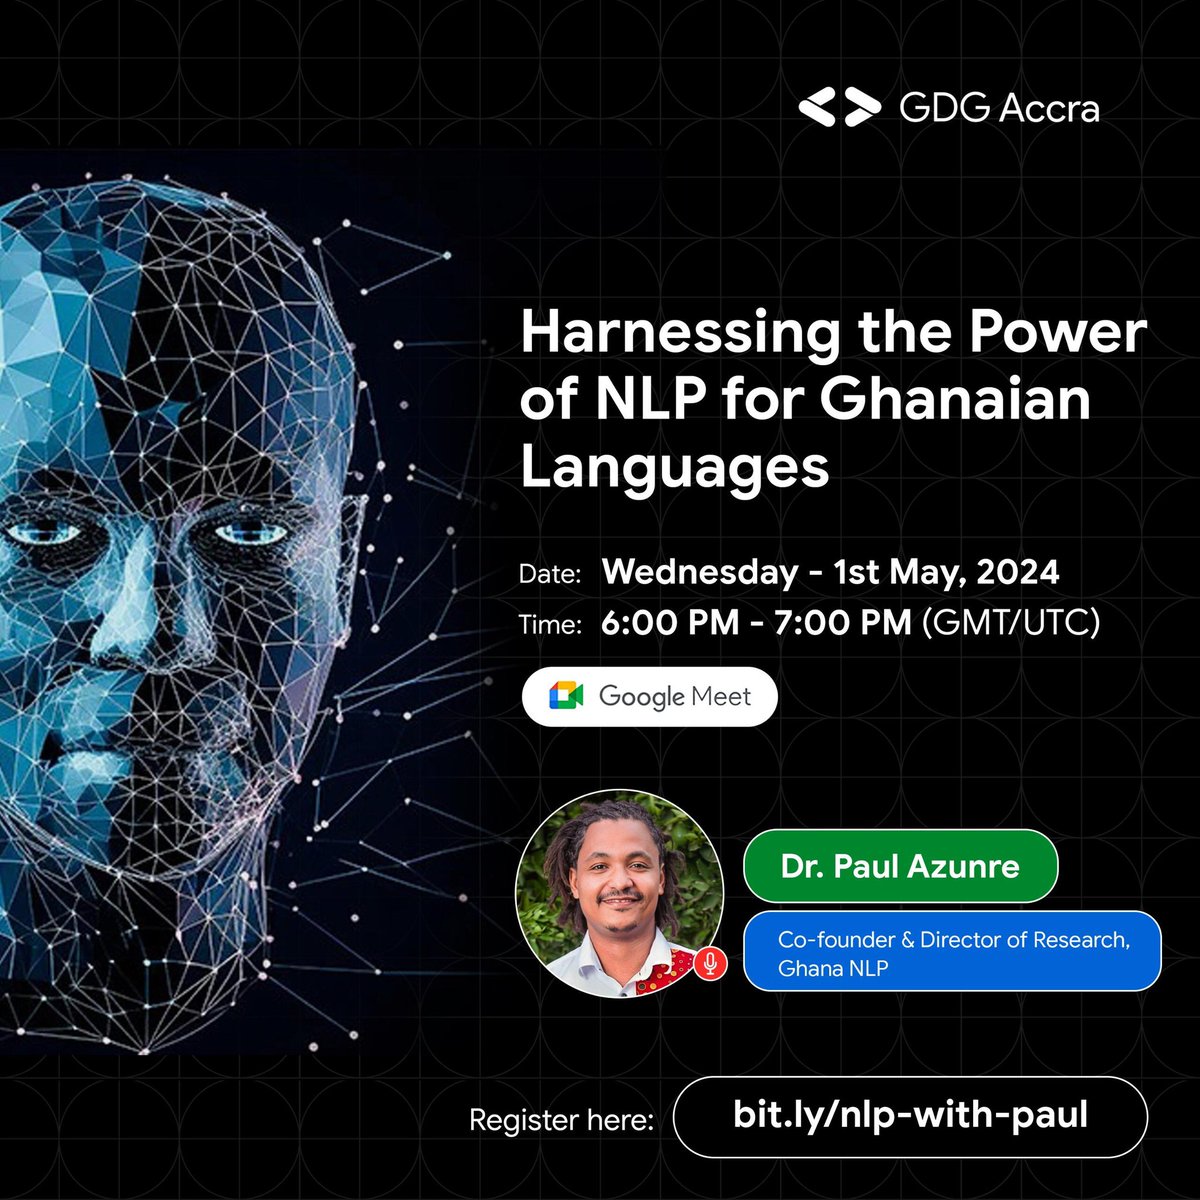 #UPNEXT Dive into the transformative power of NLP for accessibility, preservation, and tech innovation. Join the discussion with @pazunre, Co-founder of @GhanaNLP, and explore the future of Ghanaian languages in the digital era. Register now! 👉 bit.ly/nlp-with-paul